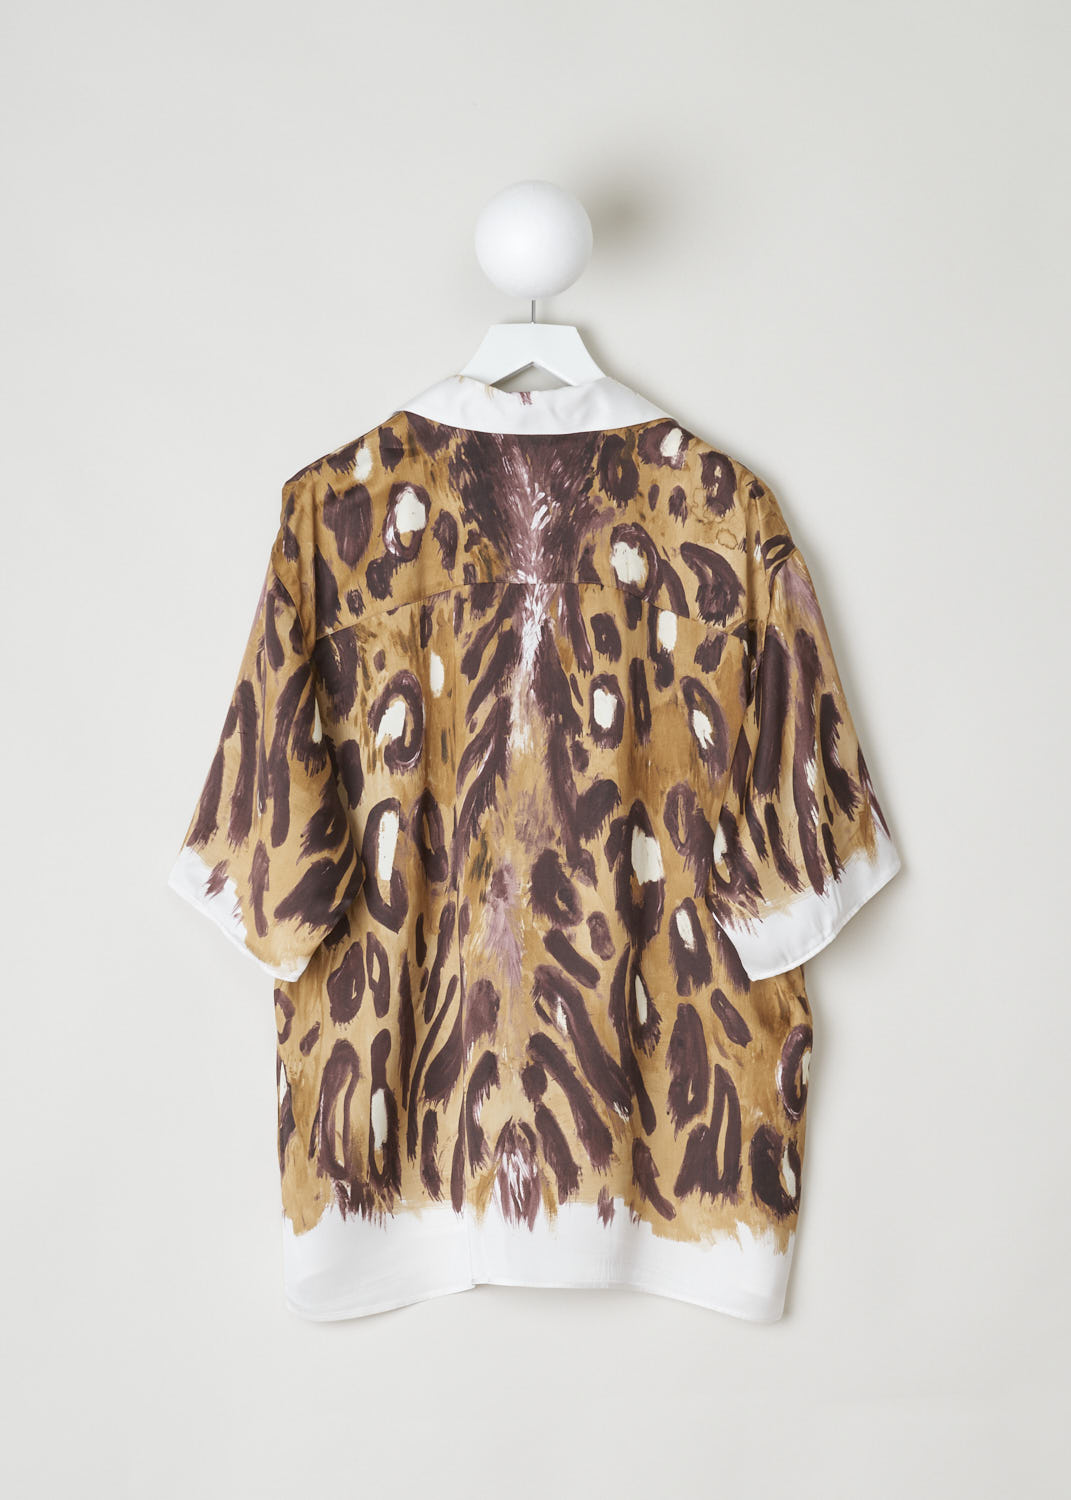 MARNI, ANIMAL PRINT BLOUSE WITH SHORT SLEEVES, CAMA0501A0_UTV912_WBM20, Brown, Print, Back, This loose fitting short sleeved blouse is made in a satin animal print. This blouse features a classic collar, a single breast pocket and front button fastening. This model has an asymmetrical finish, meaning the back is a little longer than the front.
